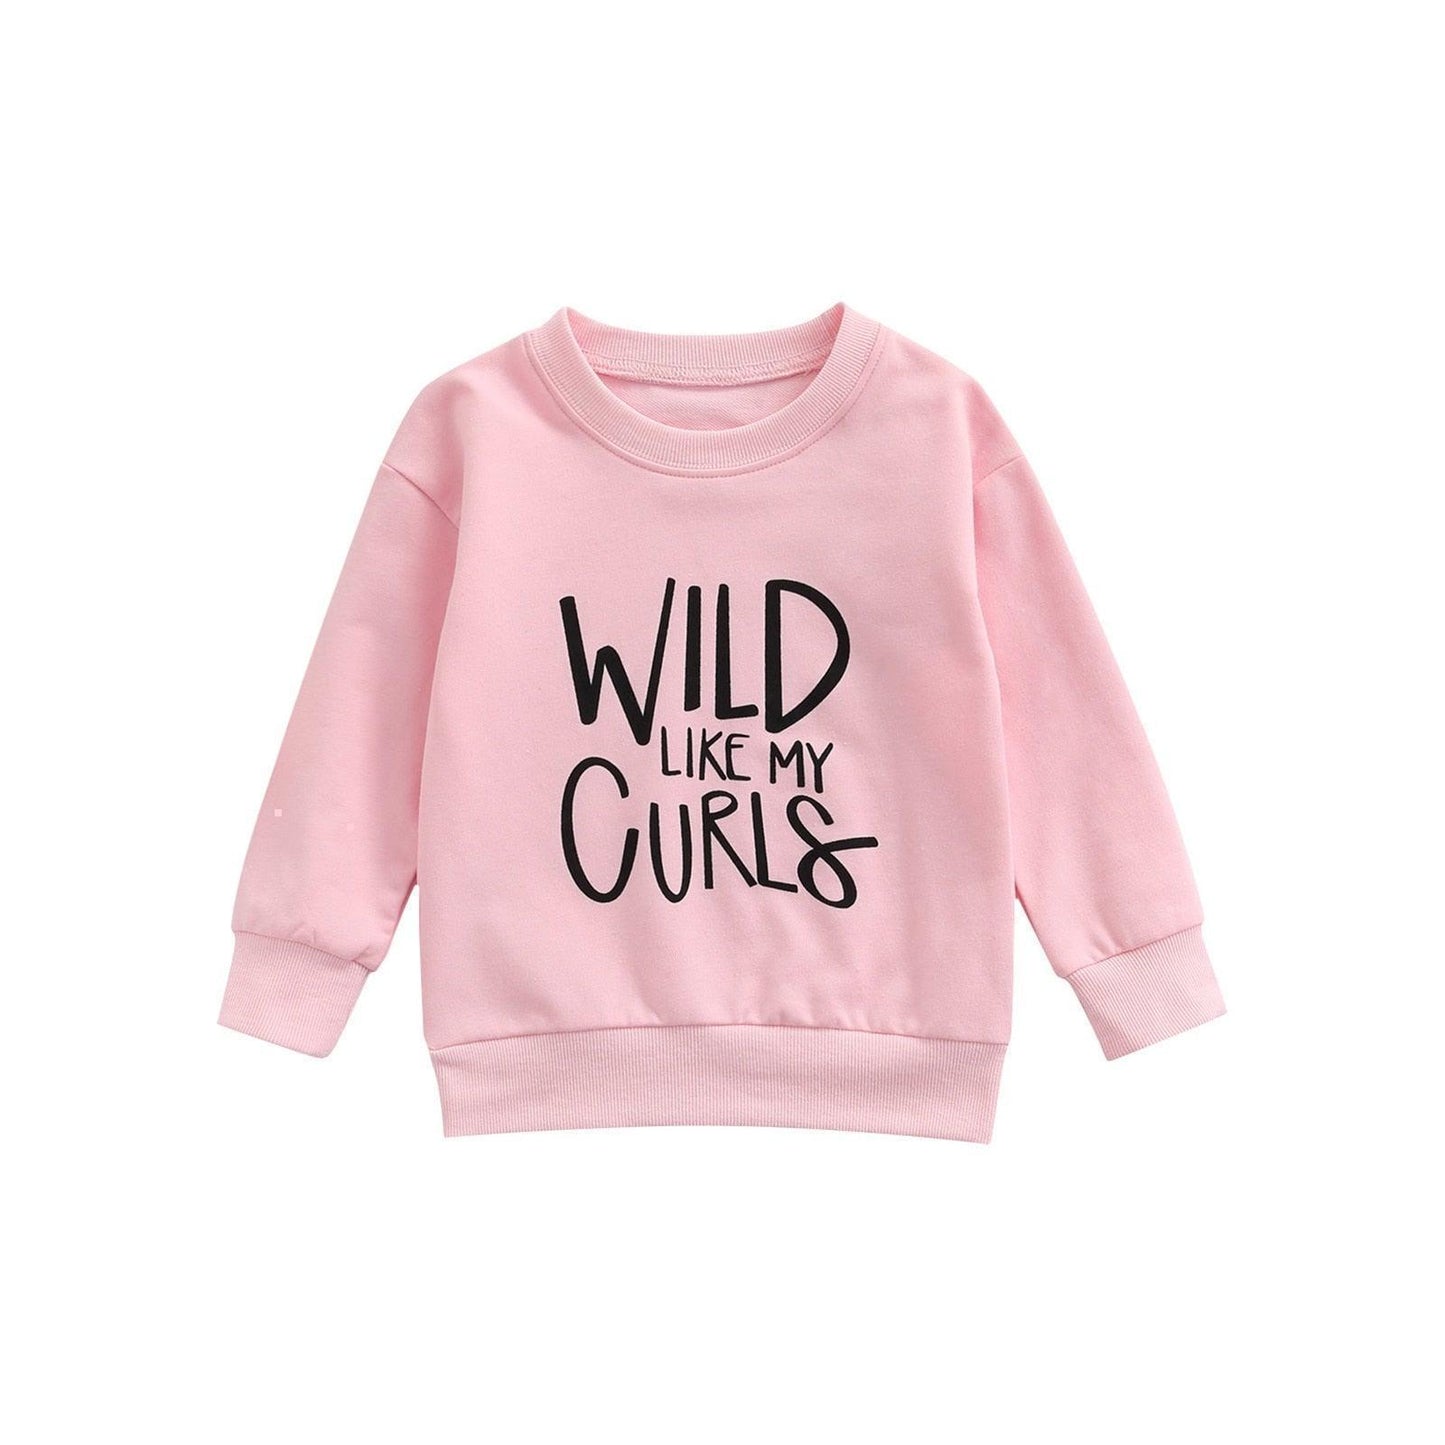 Wild Like My Curls Long Sleeve Top - Shop Baby Boutiques 